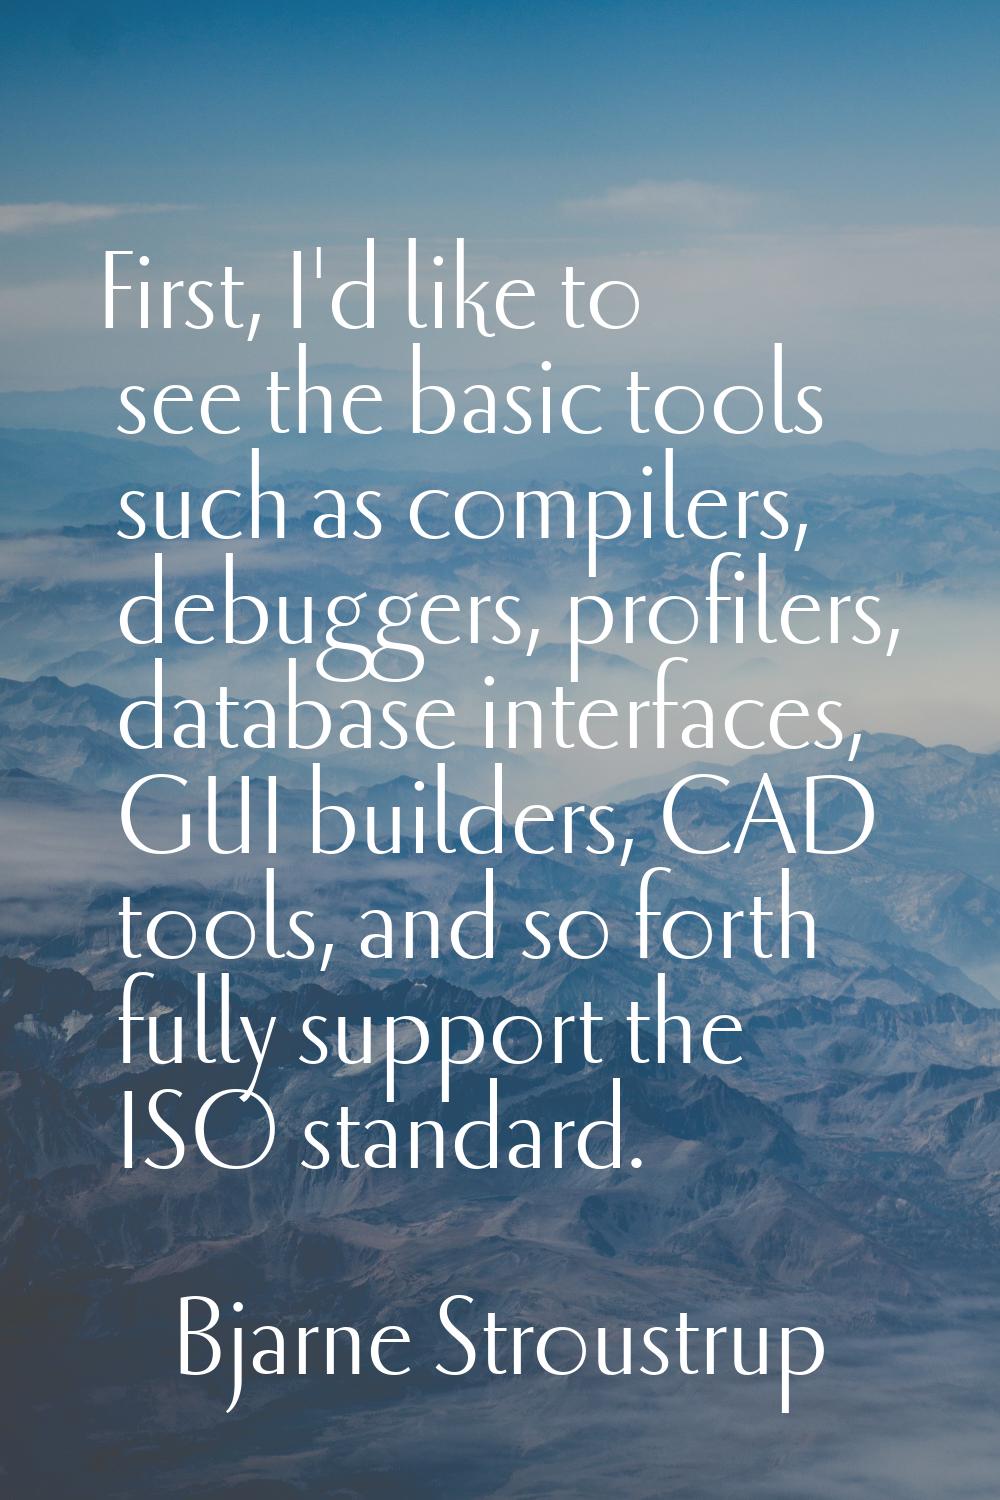 First, I'd like to see the basic tools such as compilers, debuggers, profilers, database interfaces